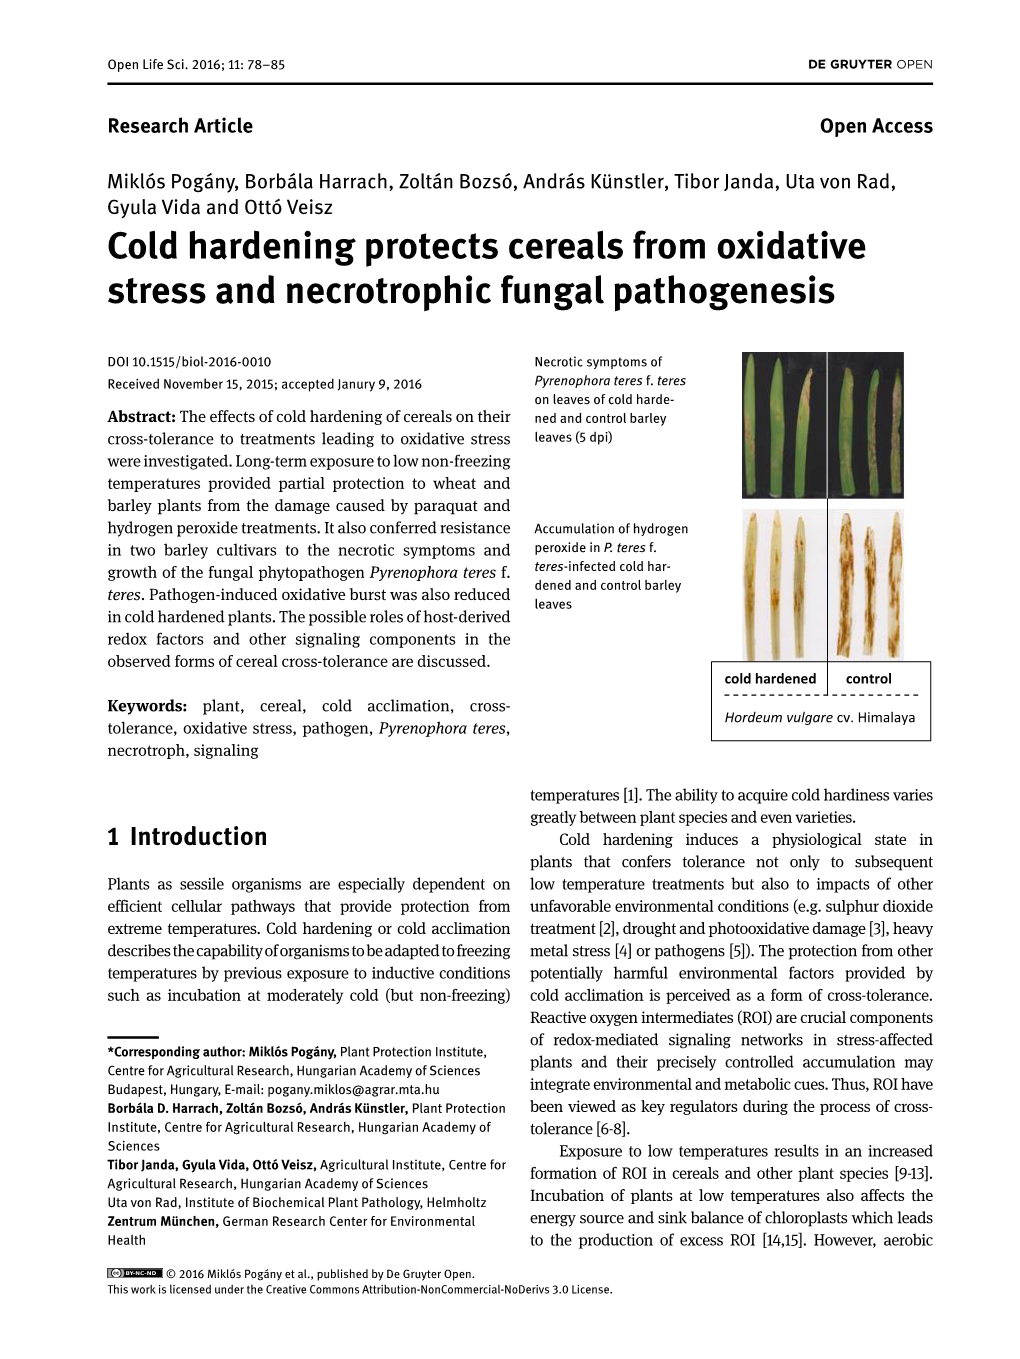 Cold Hardening Protects Cereals from Oxidative Stress and Necrotrophic Fungal Pathogenesis